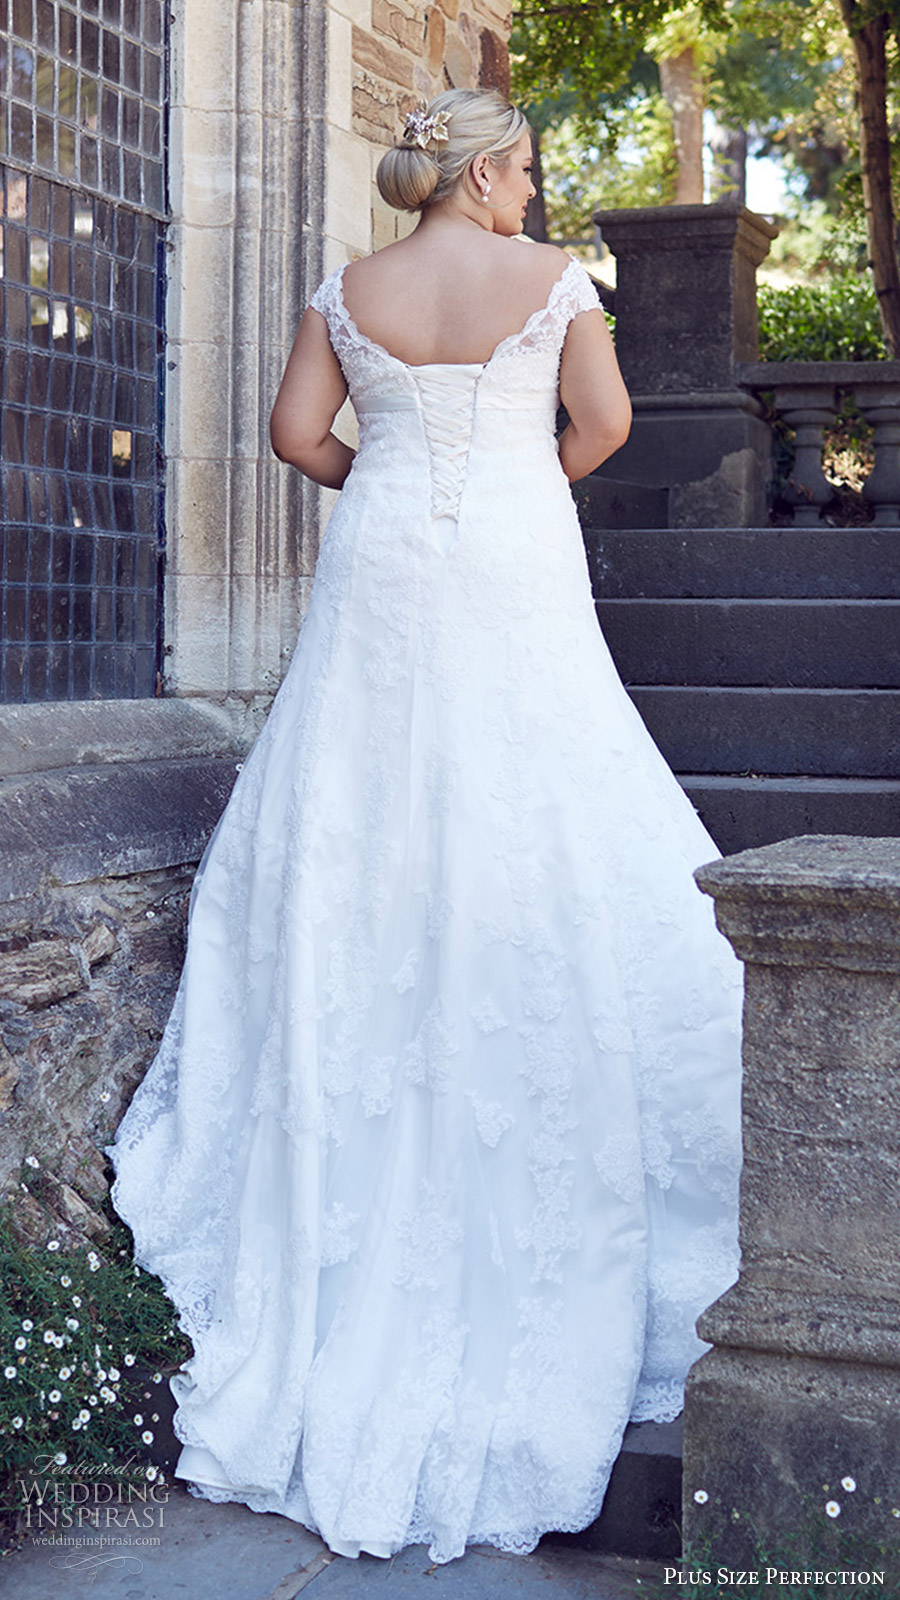 Plus Size Perfection Wedding Dresses — “it S A Love Story” Campaign Wedding Inspirasi